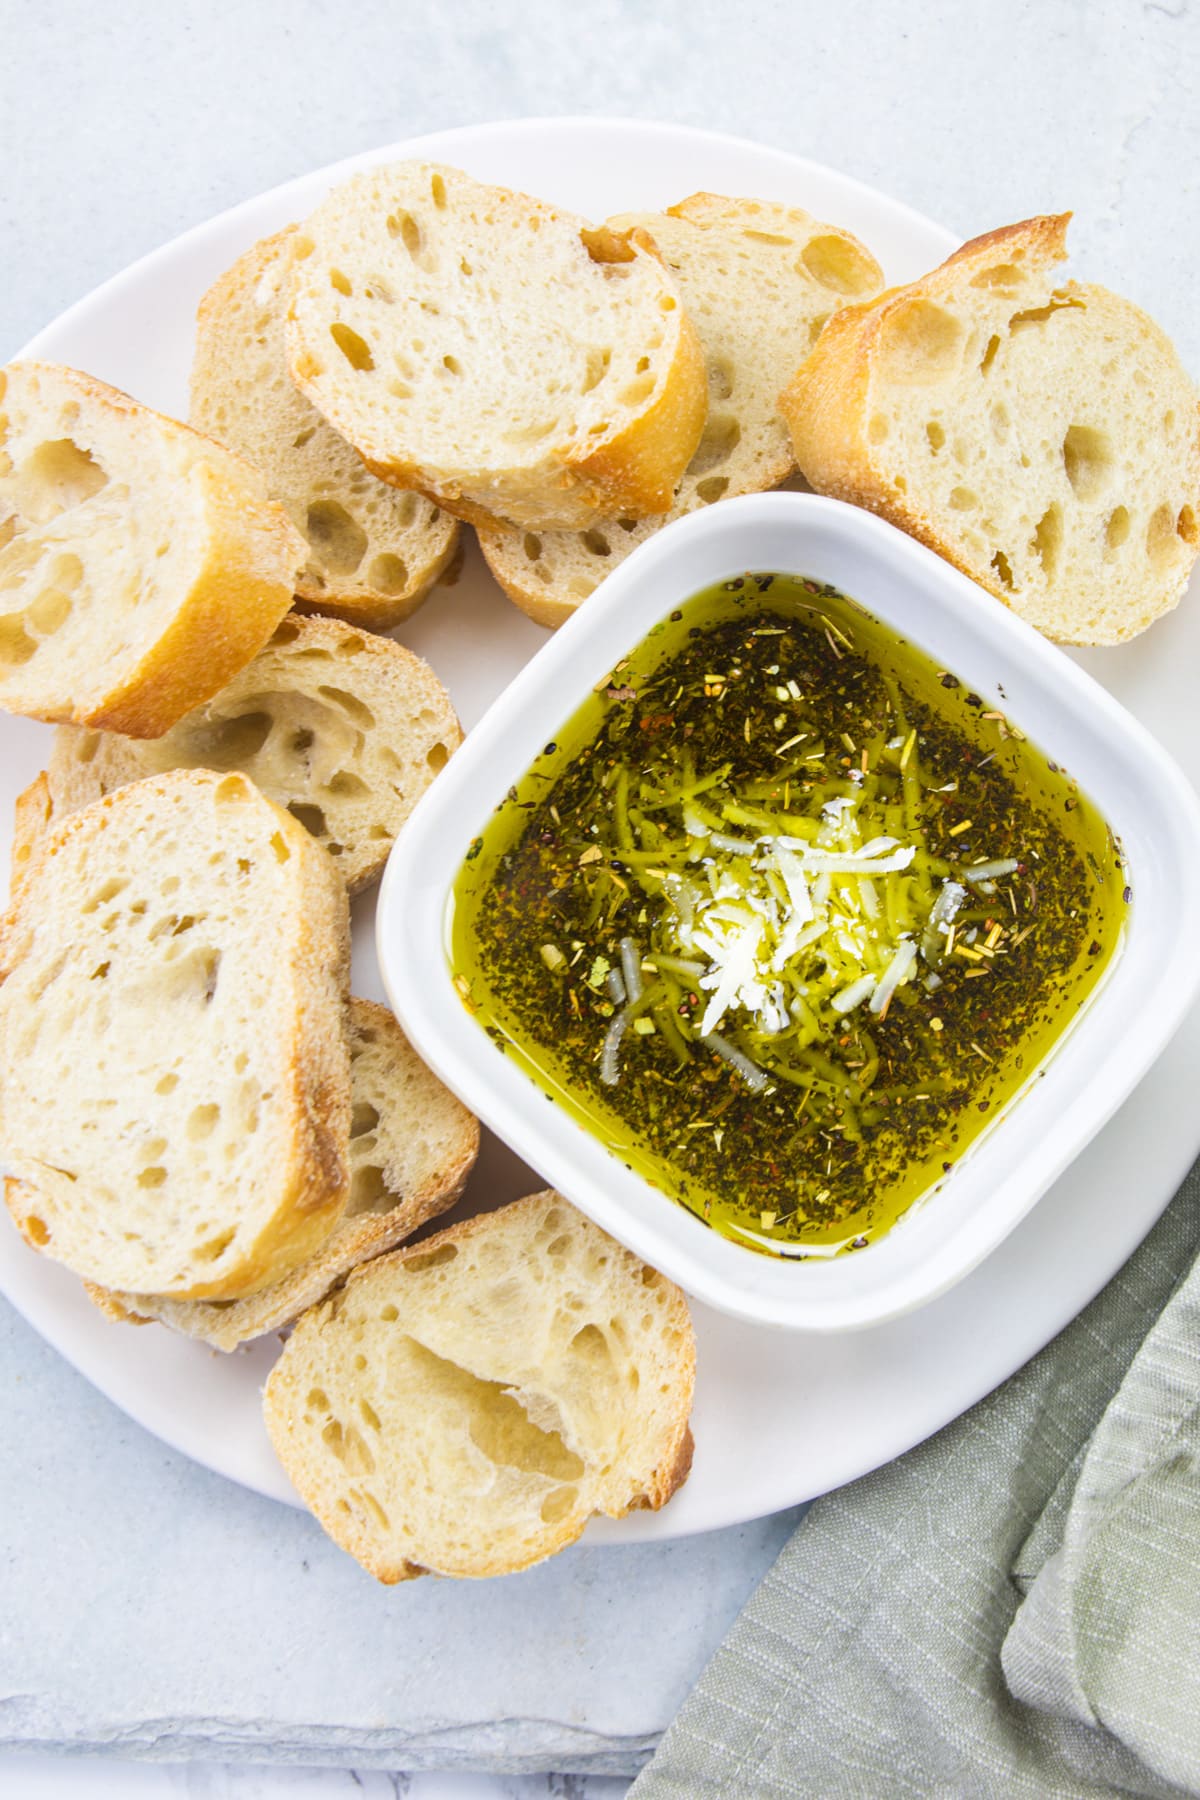 Bread dipping oil in a bowl with bread slices on the side.